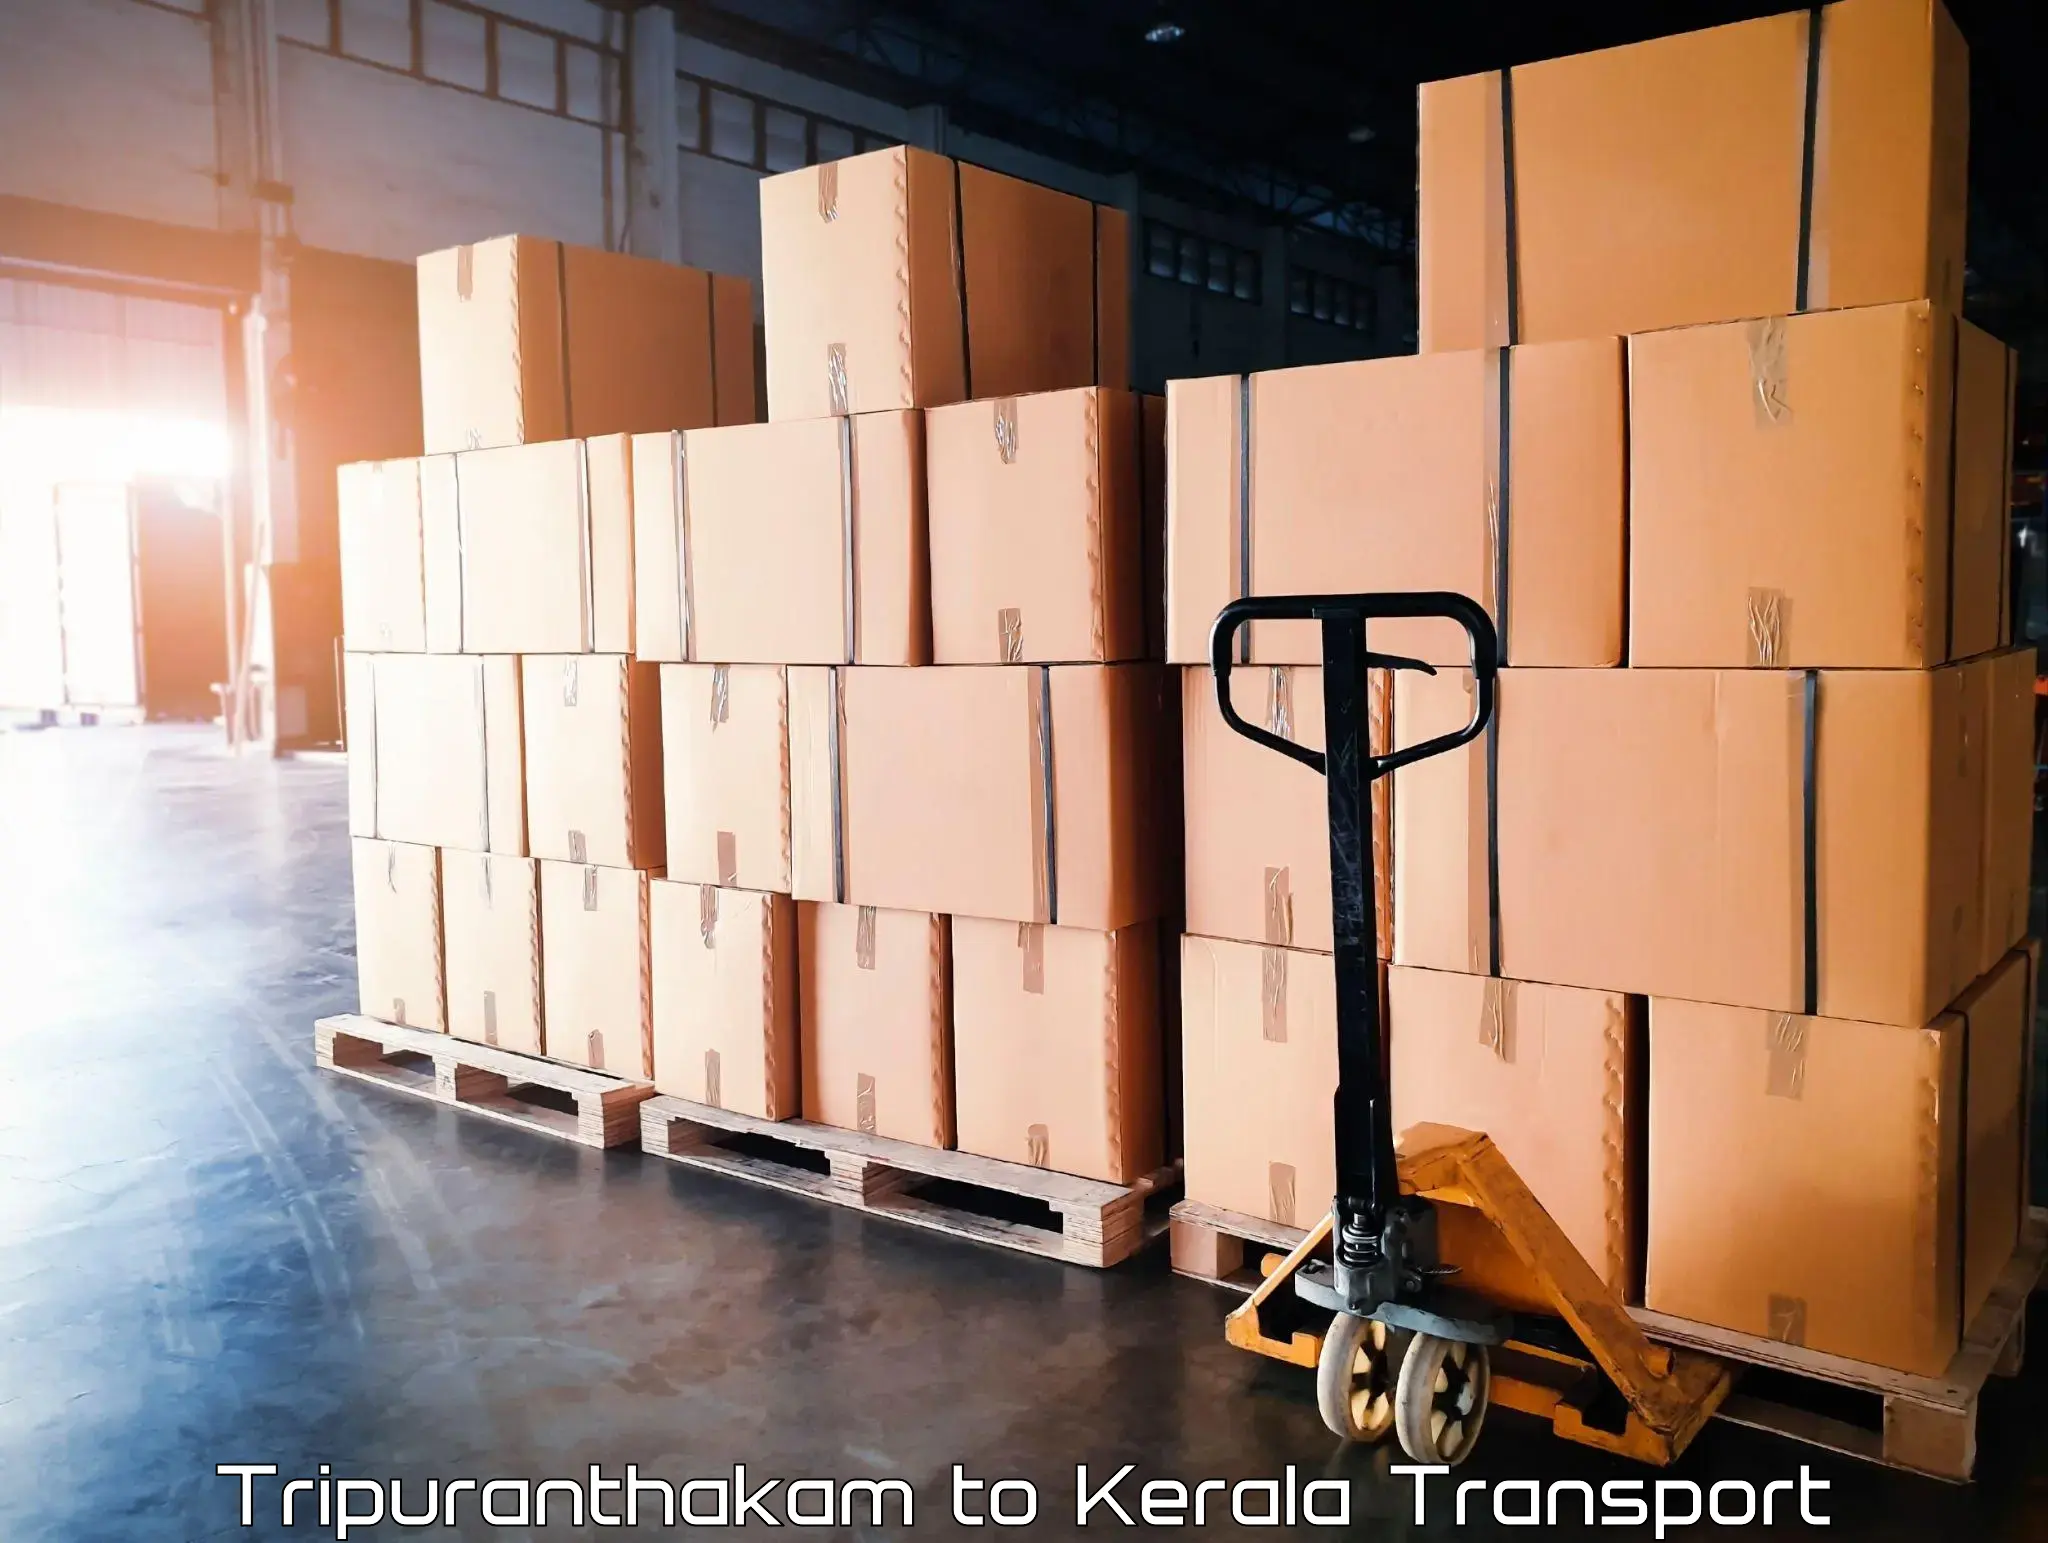 Transport bike from one state to another in Tripuranthakam to Ponnani